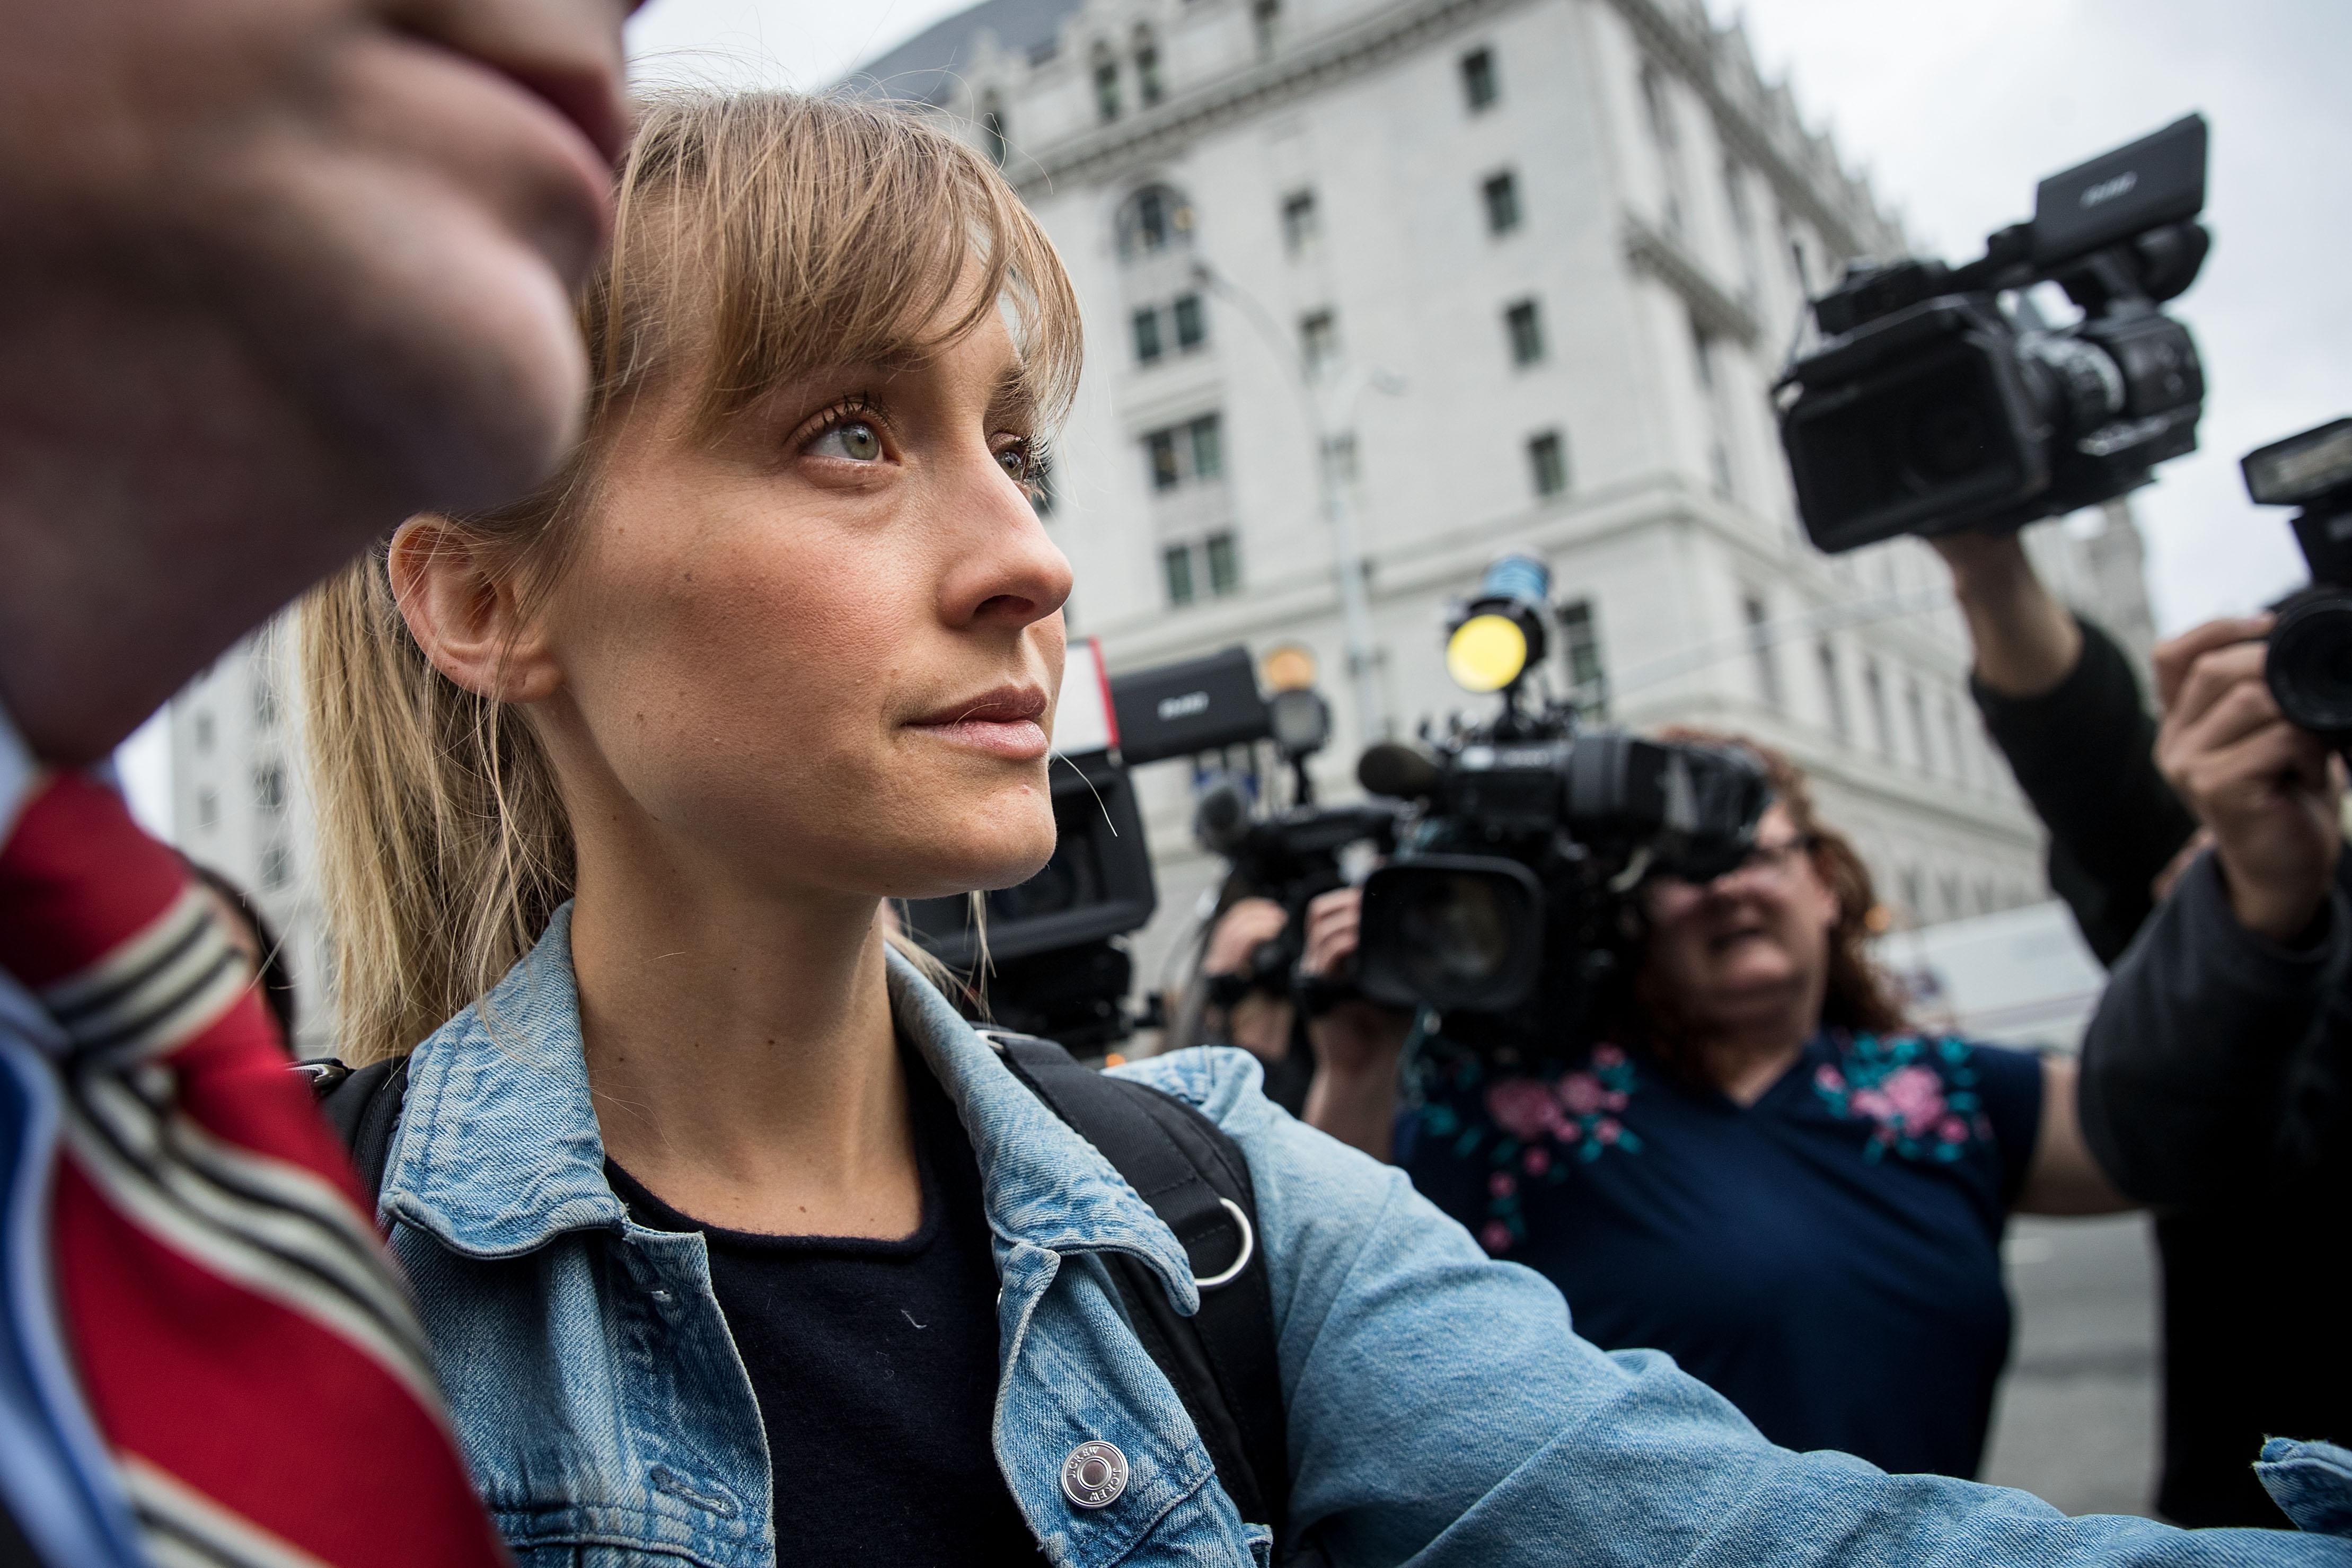 NEW YORK, NY - APRIL 24: Actress Allison Mack leaves U.S. District Court for the Eastern District of New York after a bail hearing, April 24, 2018 in the Brooklyn borough of New York City. Mack was charged last Friday with sex trafficking for her involvement with a self-help organization for women that forced members into sexual acts with their leader. The group, called Nxivm, was led by founder Keith Raniere, who was arrested in March on sex-trafficking charges. She was released on bail at $5 million. (Photo by Drew Angerer/Getty Images)